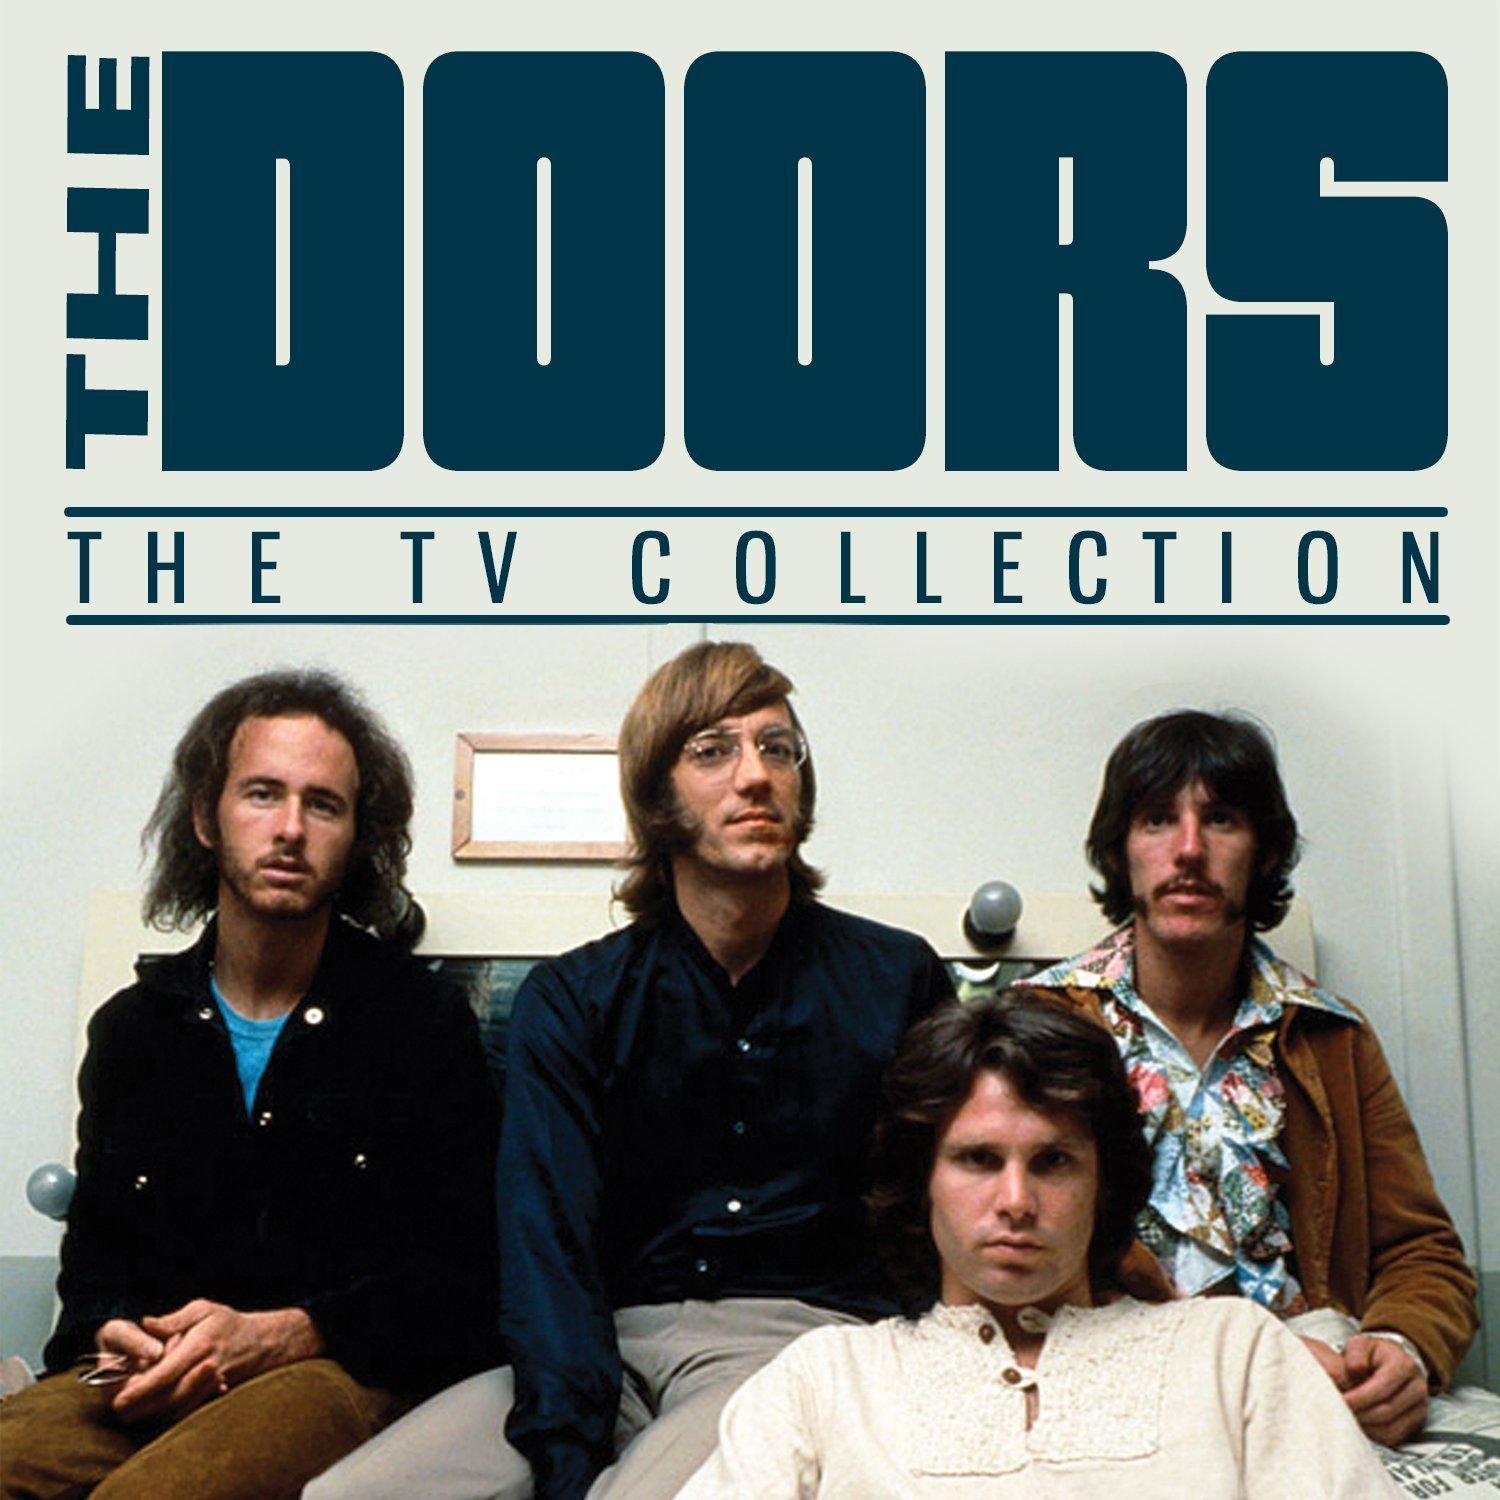 Vinyl Record The Doors - The TV Collection (2 LP)